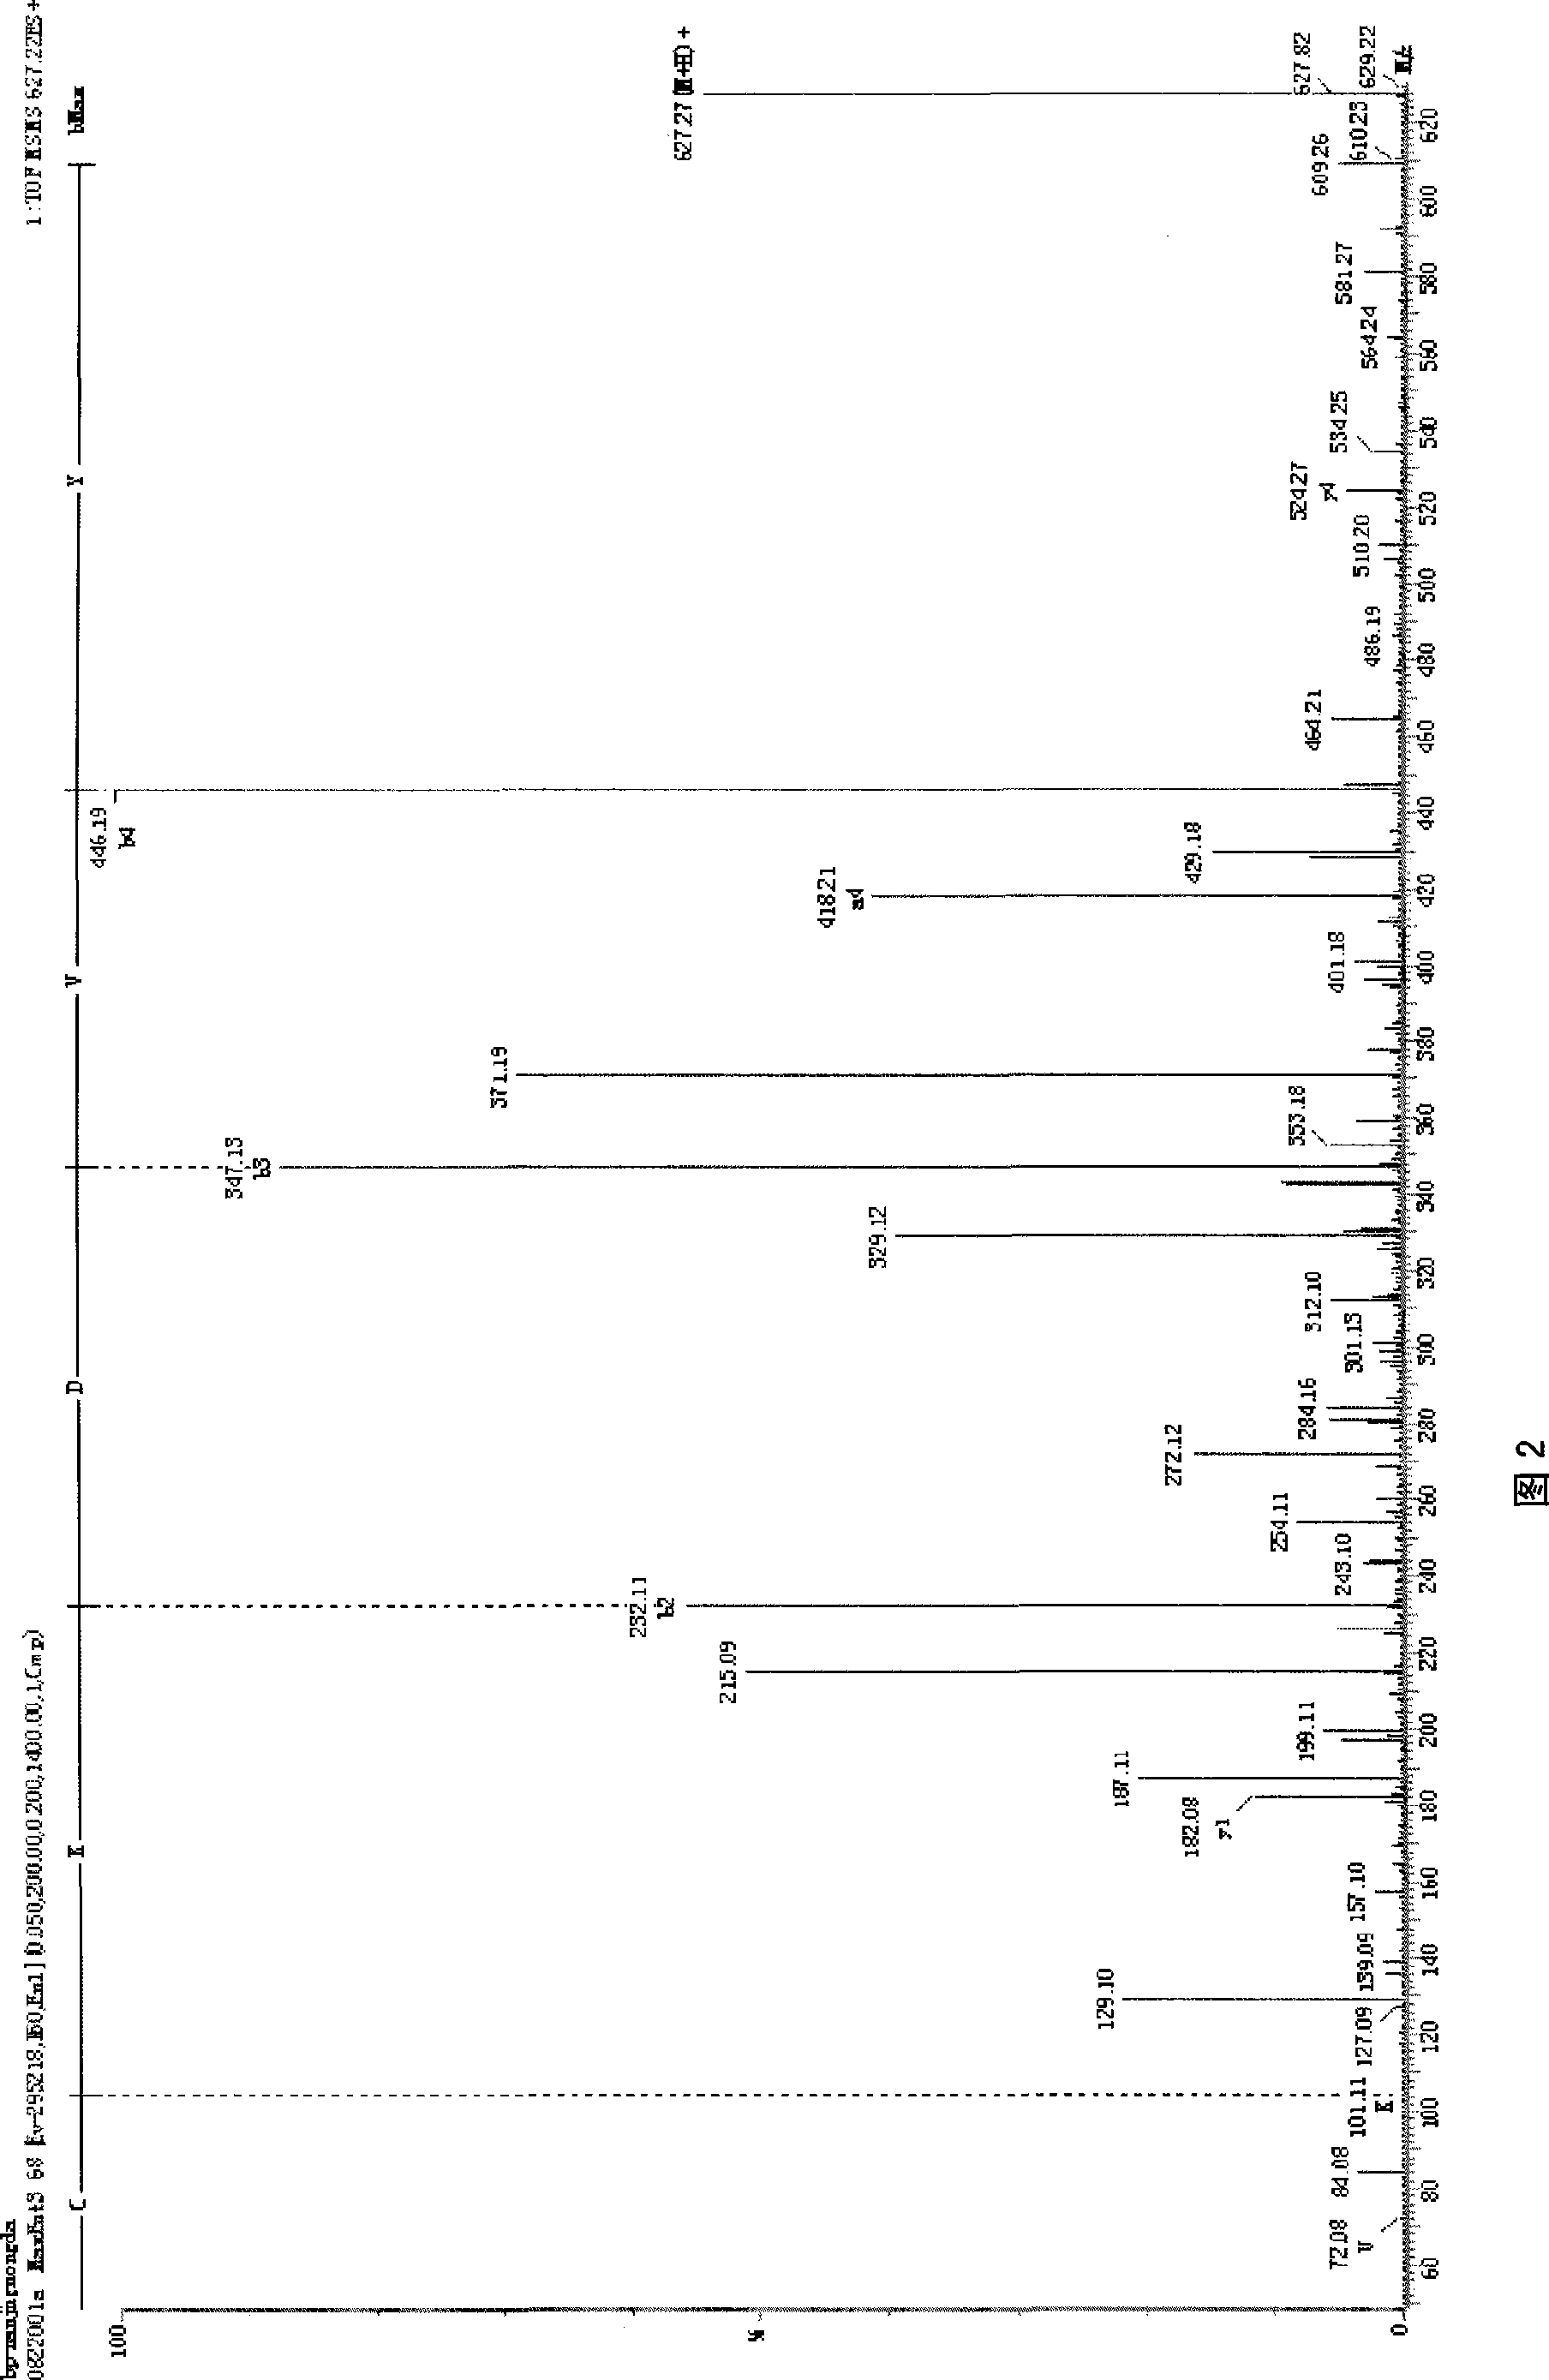 Bursa pentapeptide, deriving peptide thereof and use thereof